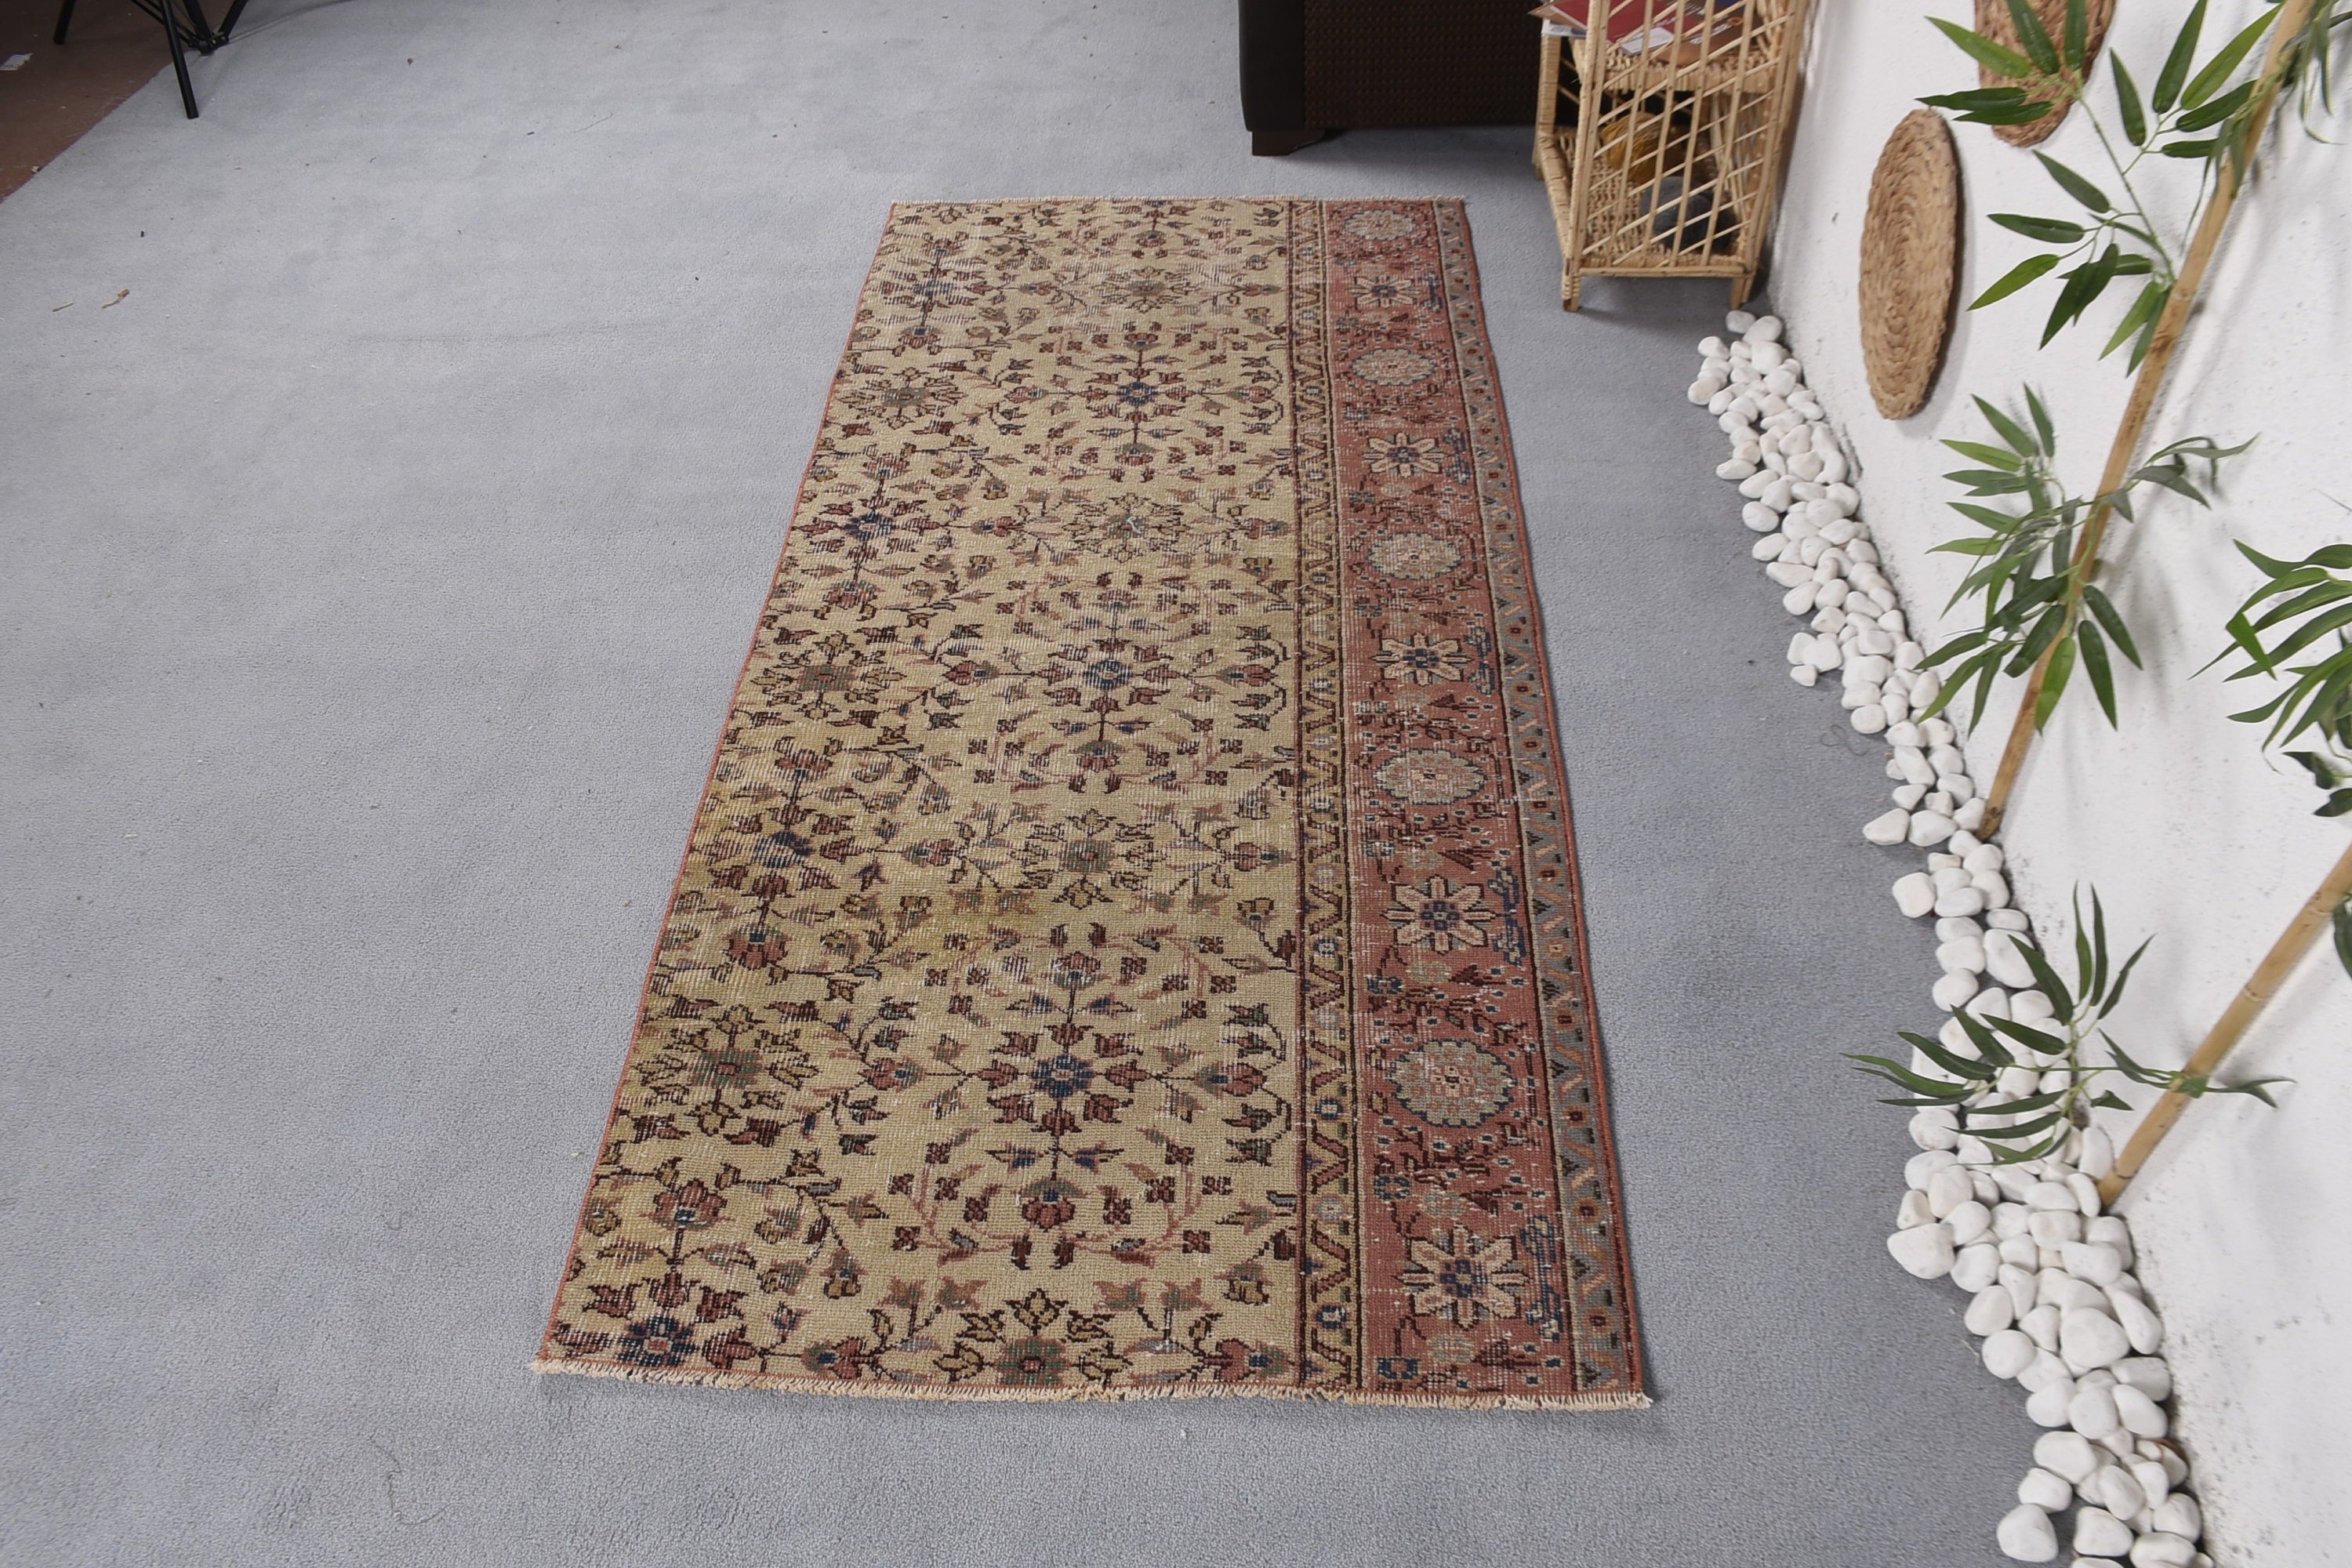 Beige Moroccan Rugs, Vintage Rug, 3.1x7.2 ft Accent Rugs, Anatolian Rugs, Eclectic Rug, Bedroom Rug, Entry Rug, Turkish Rug, Antique Rug